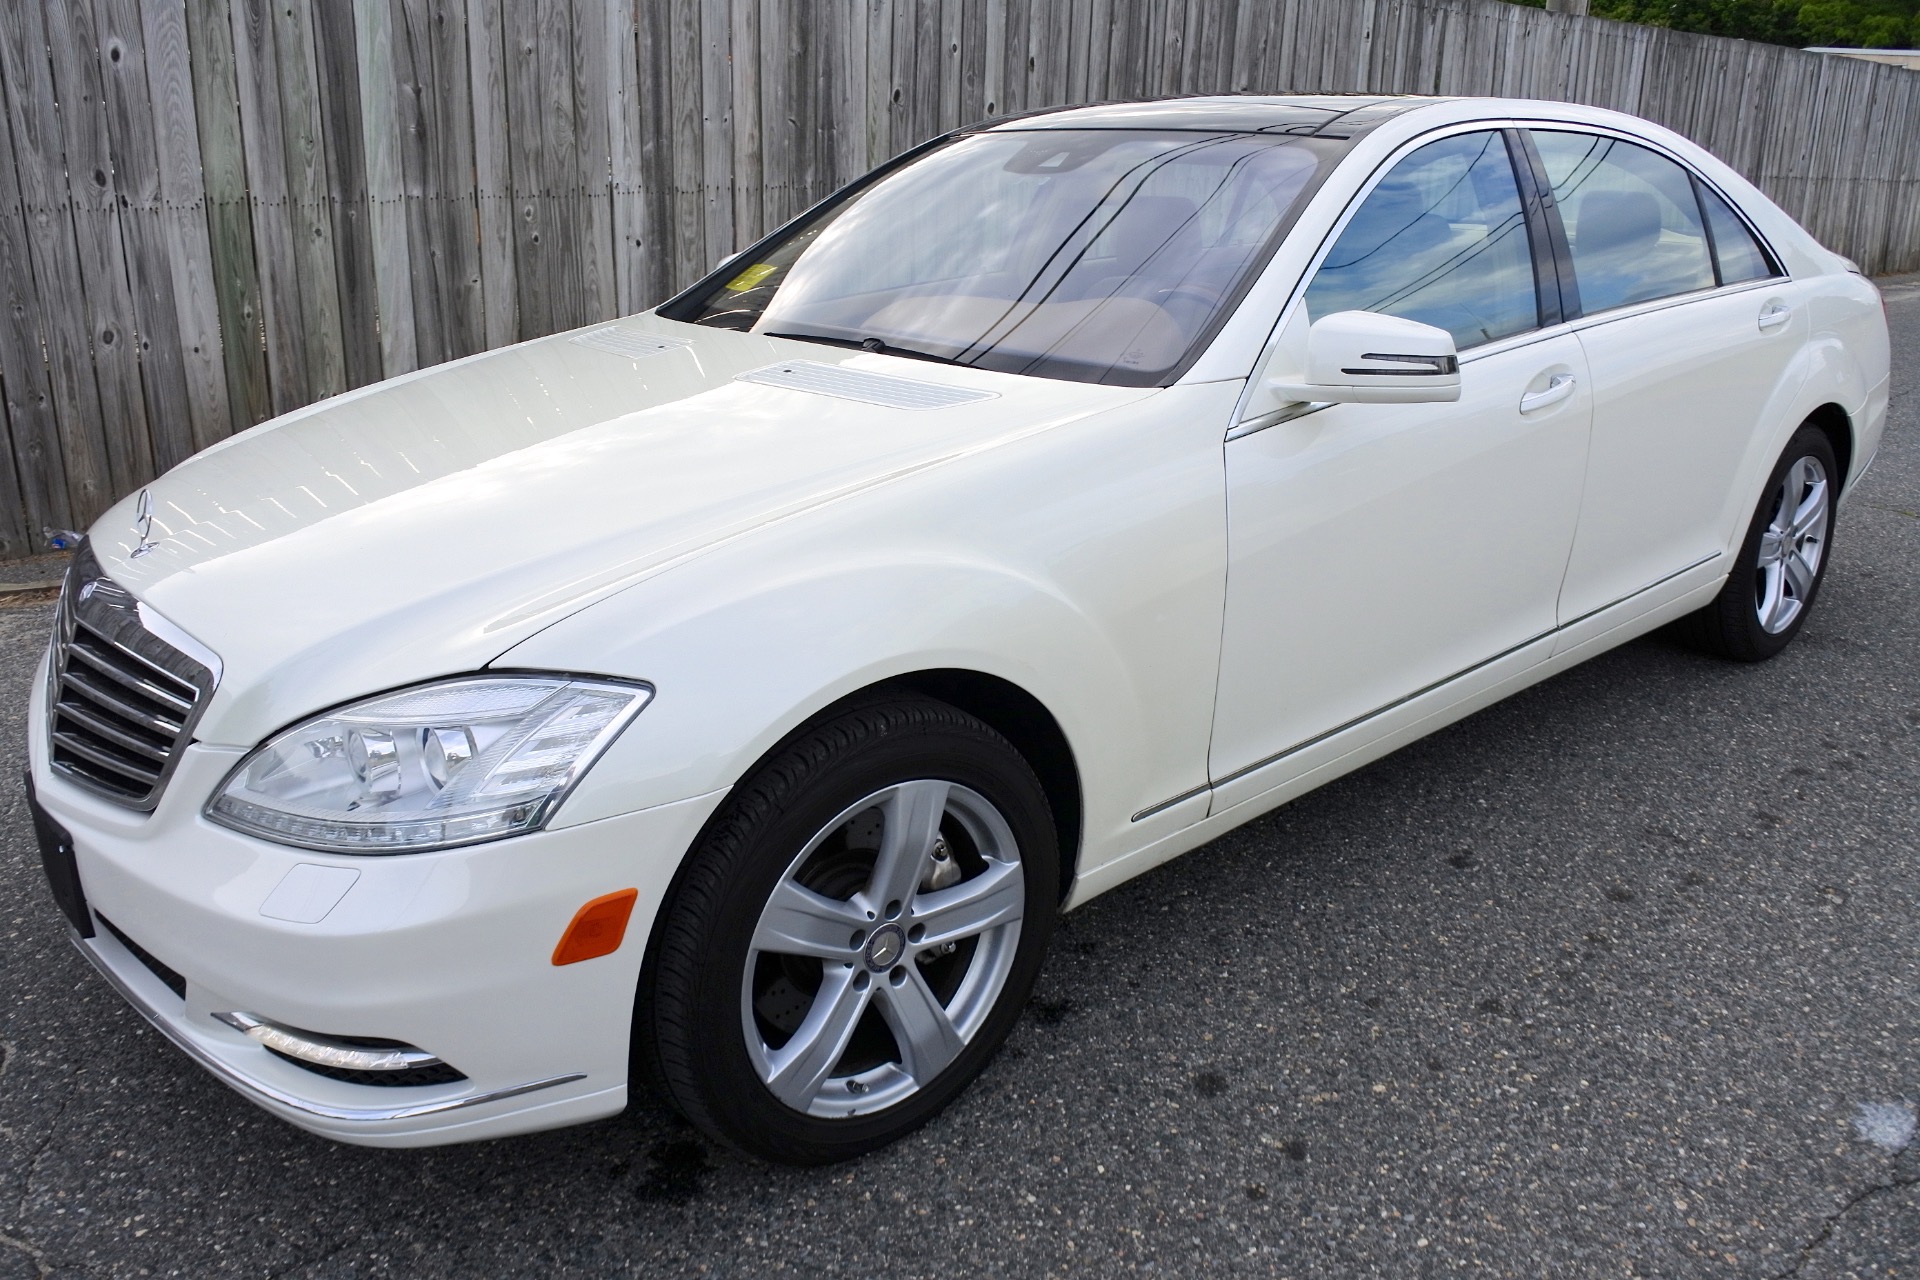 2010 MERCEDES-BENZ S-Class S550 4MATIC For Sale in Shrewsbury MA by ...